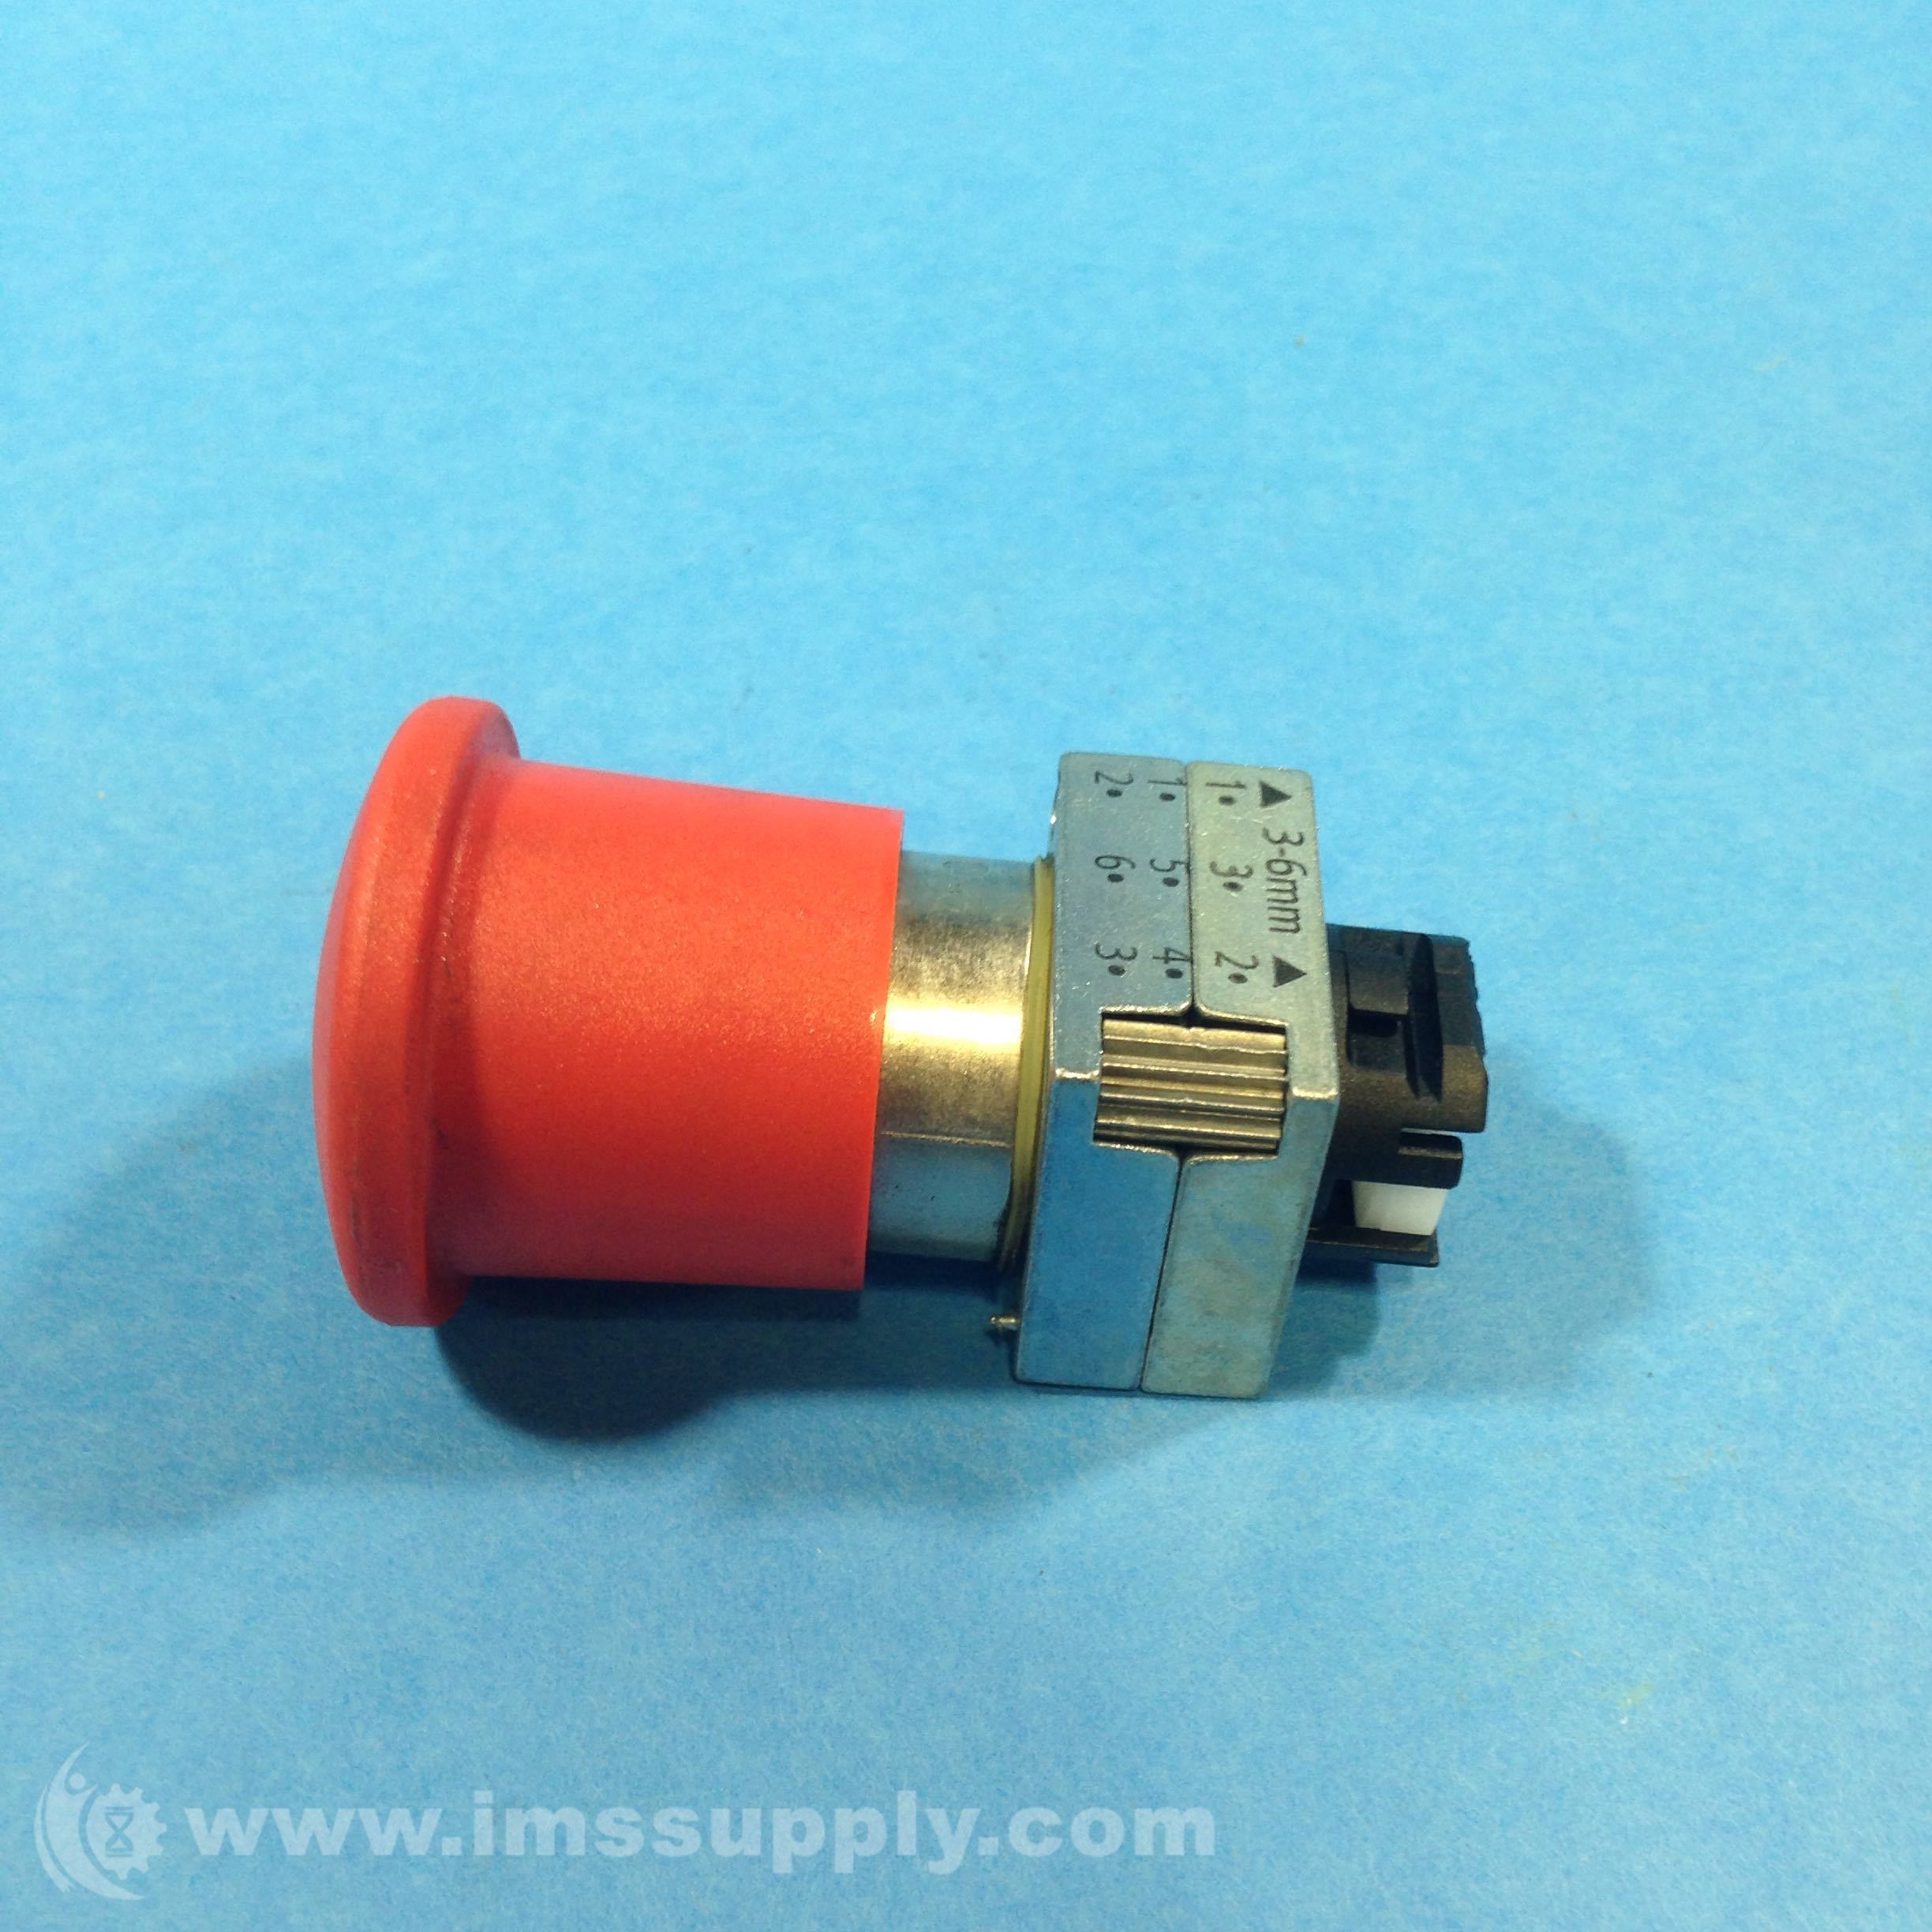 40MM Details about   SIEMENS 3SB3 500-1TA20 RED EMERGENCY-STOP PUSH BUTTON NEW #152012 